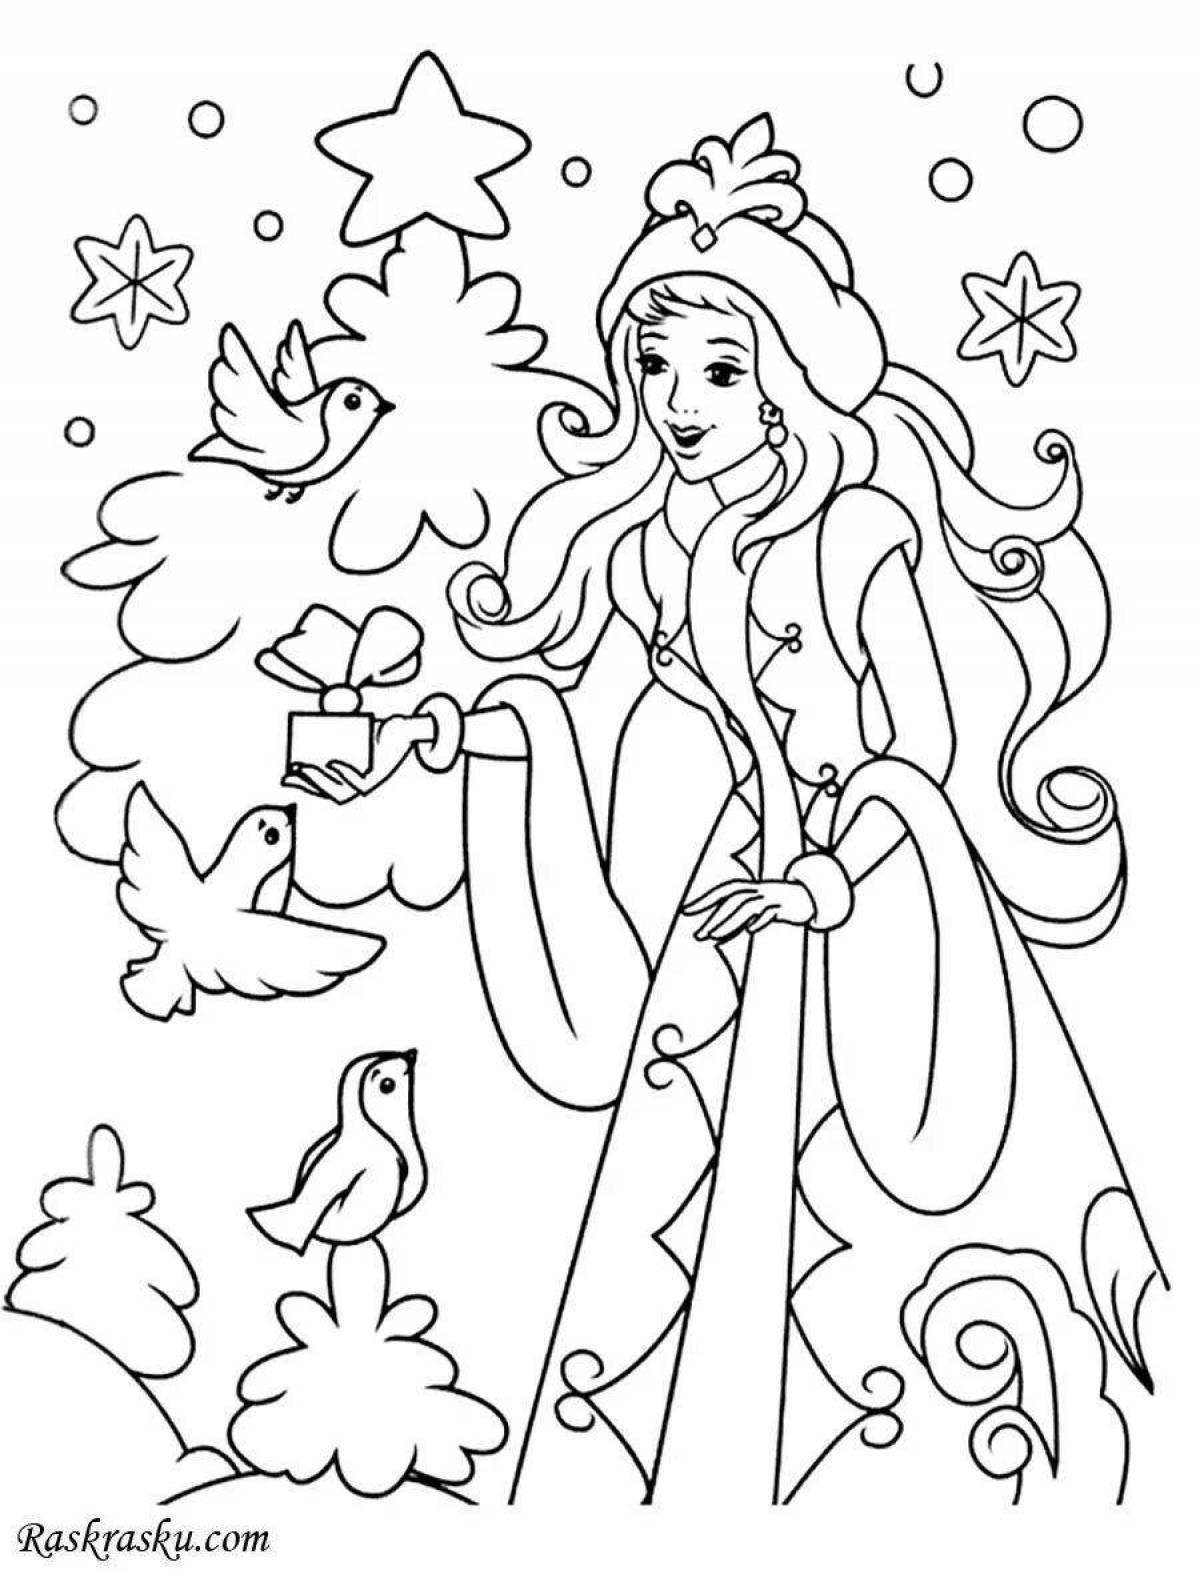 Colorful coloring of the snow maiden